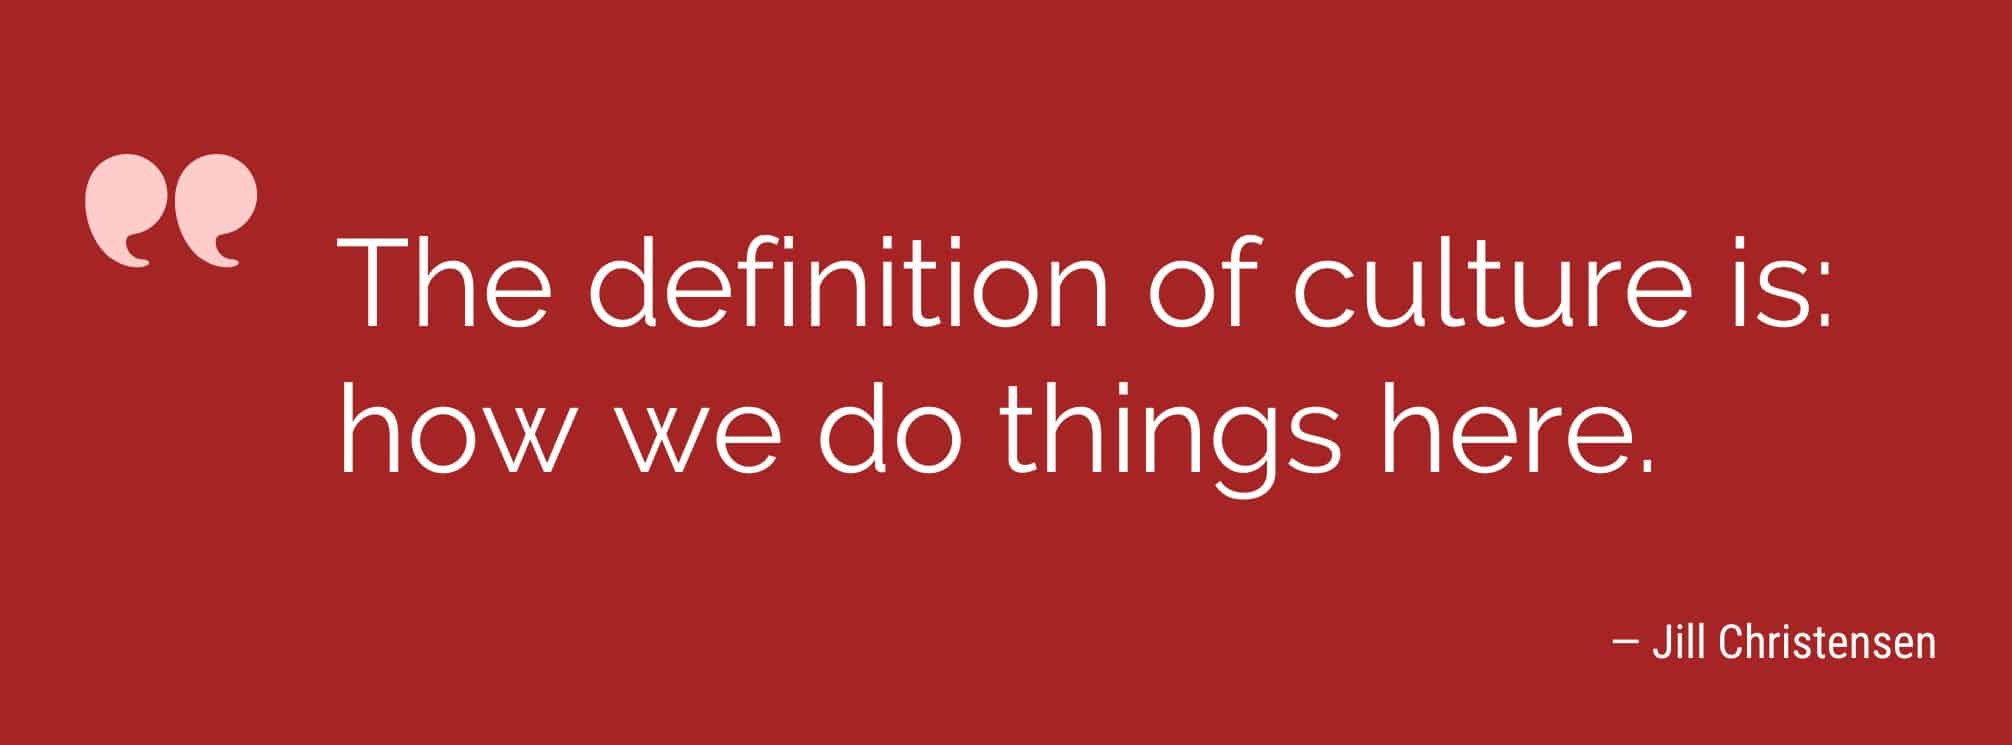 Graphic that says "the definition of culture is how we do things here" with the credit to Jill Christensen